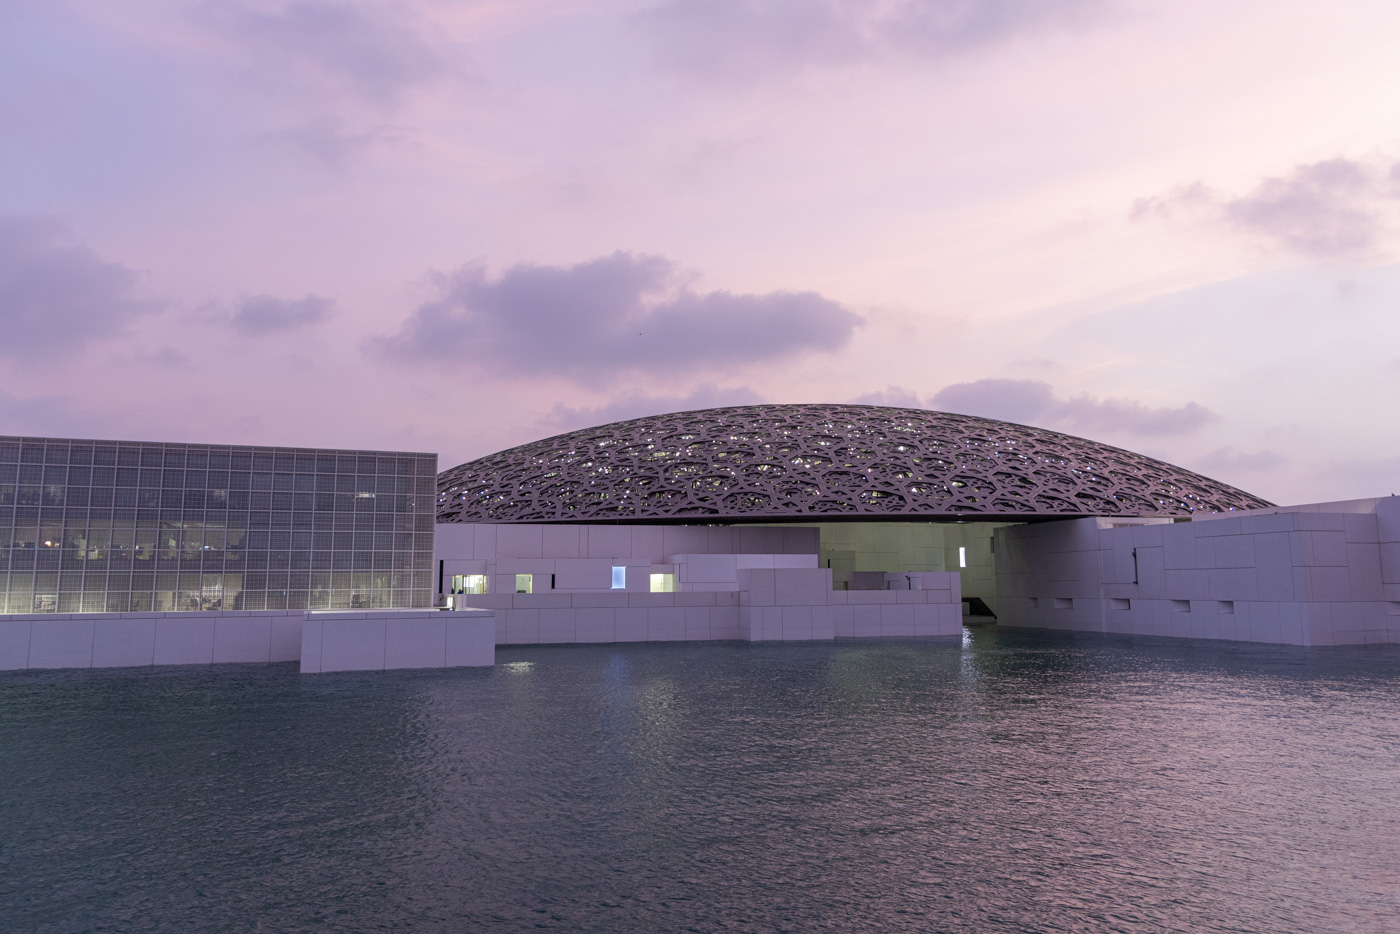 Louvre Abu Dhabi Partners To Deliver Stunning ICC Men’s T20 World Cup Trophy Images